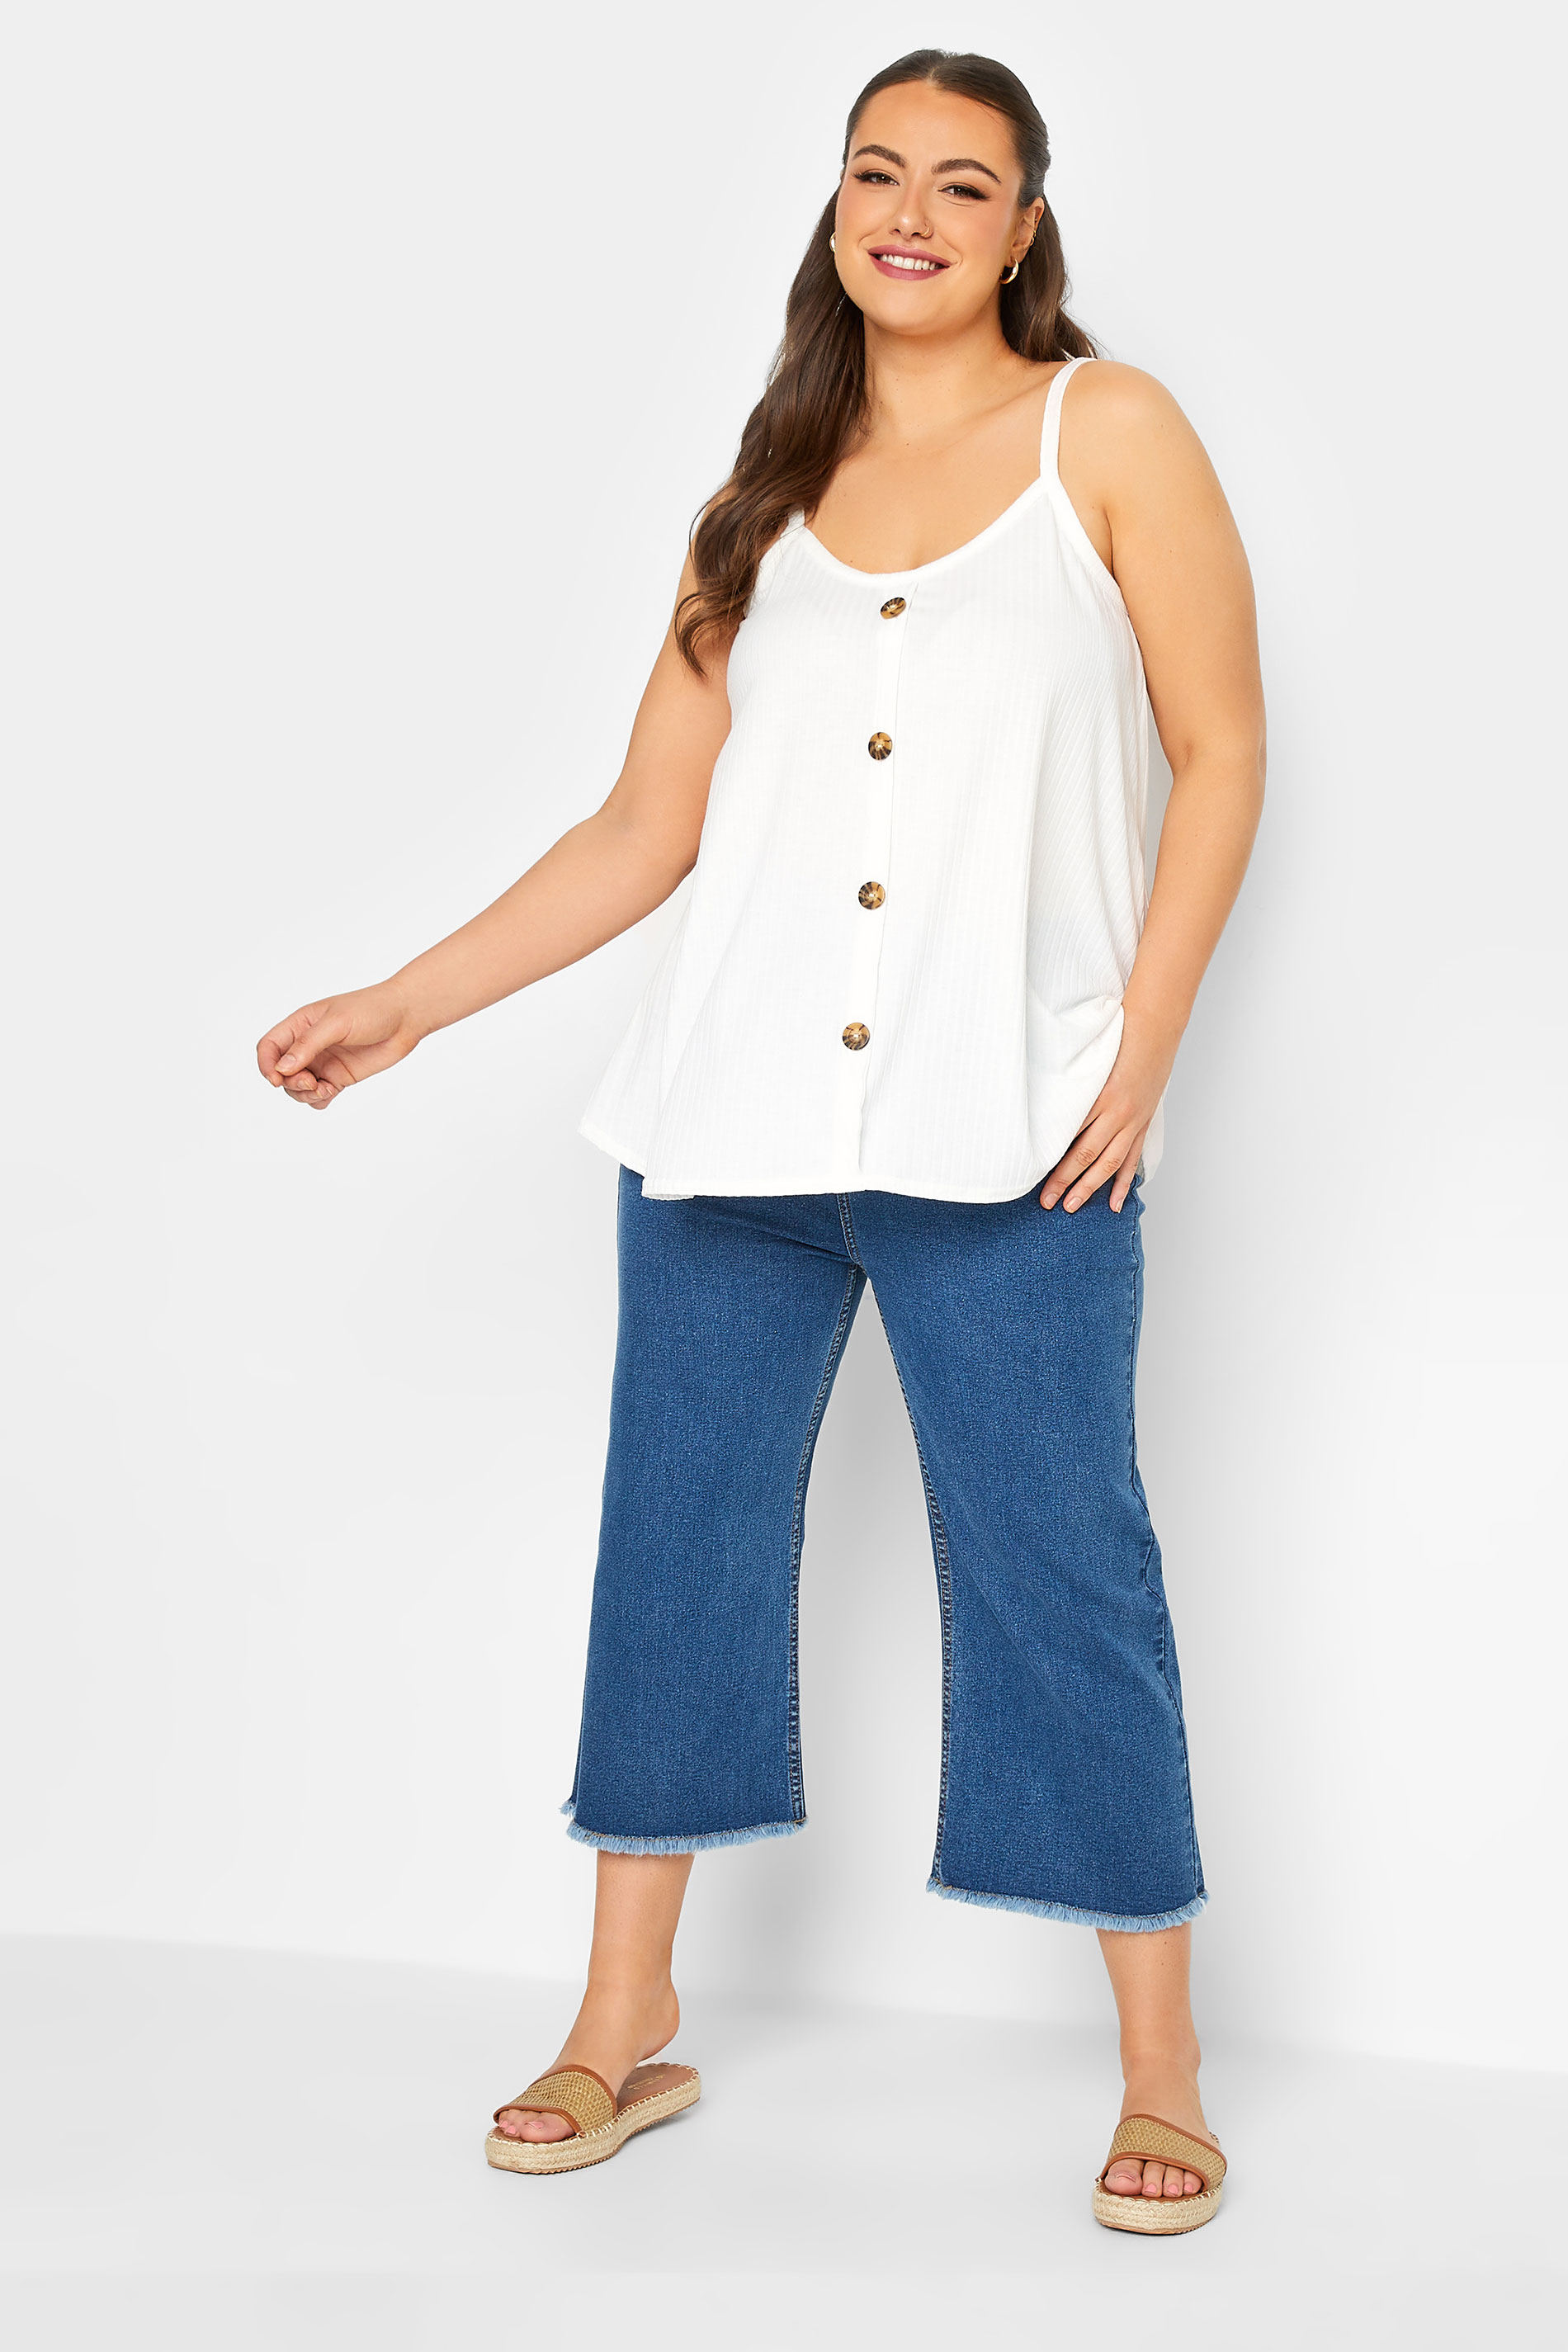 LIMITED COLLECTION Plus Size White Button Down Cami Top | Yours Clothing  2